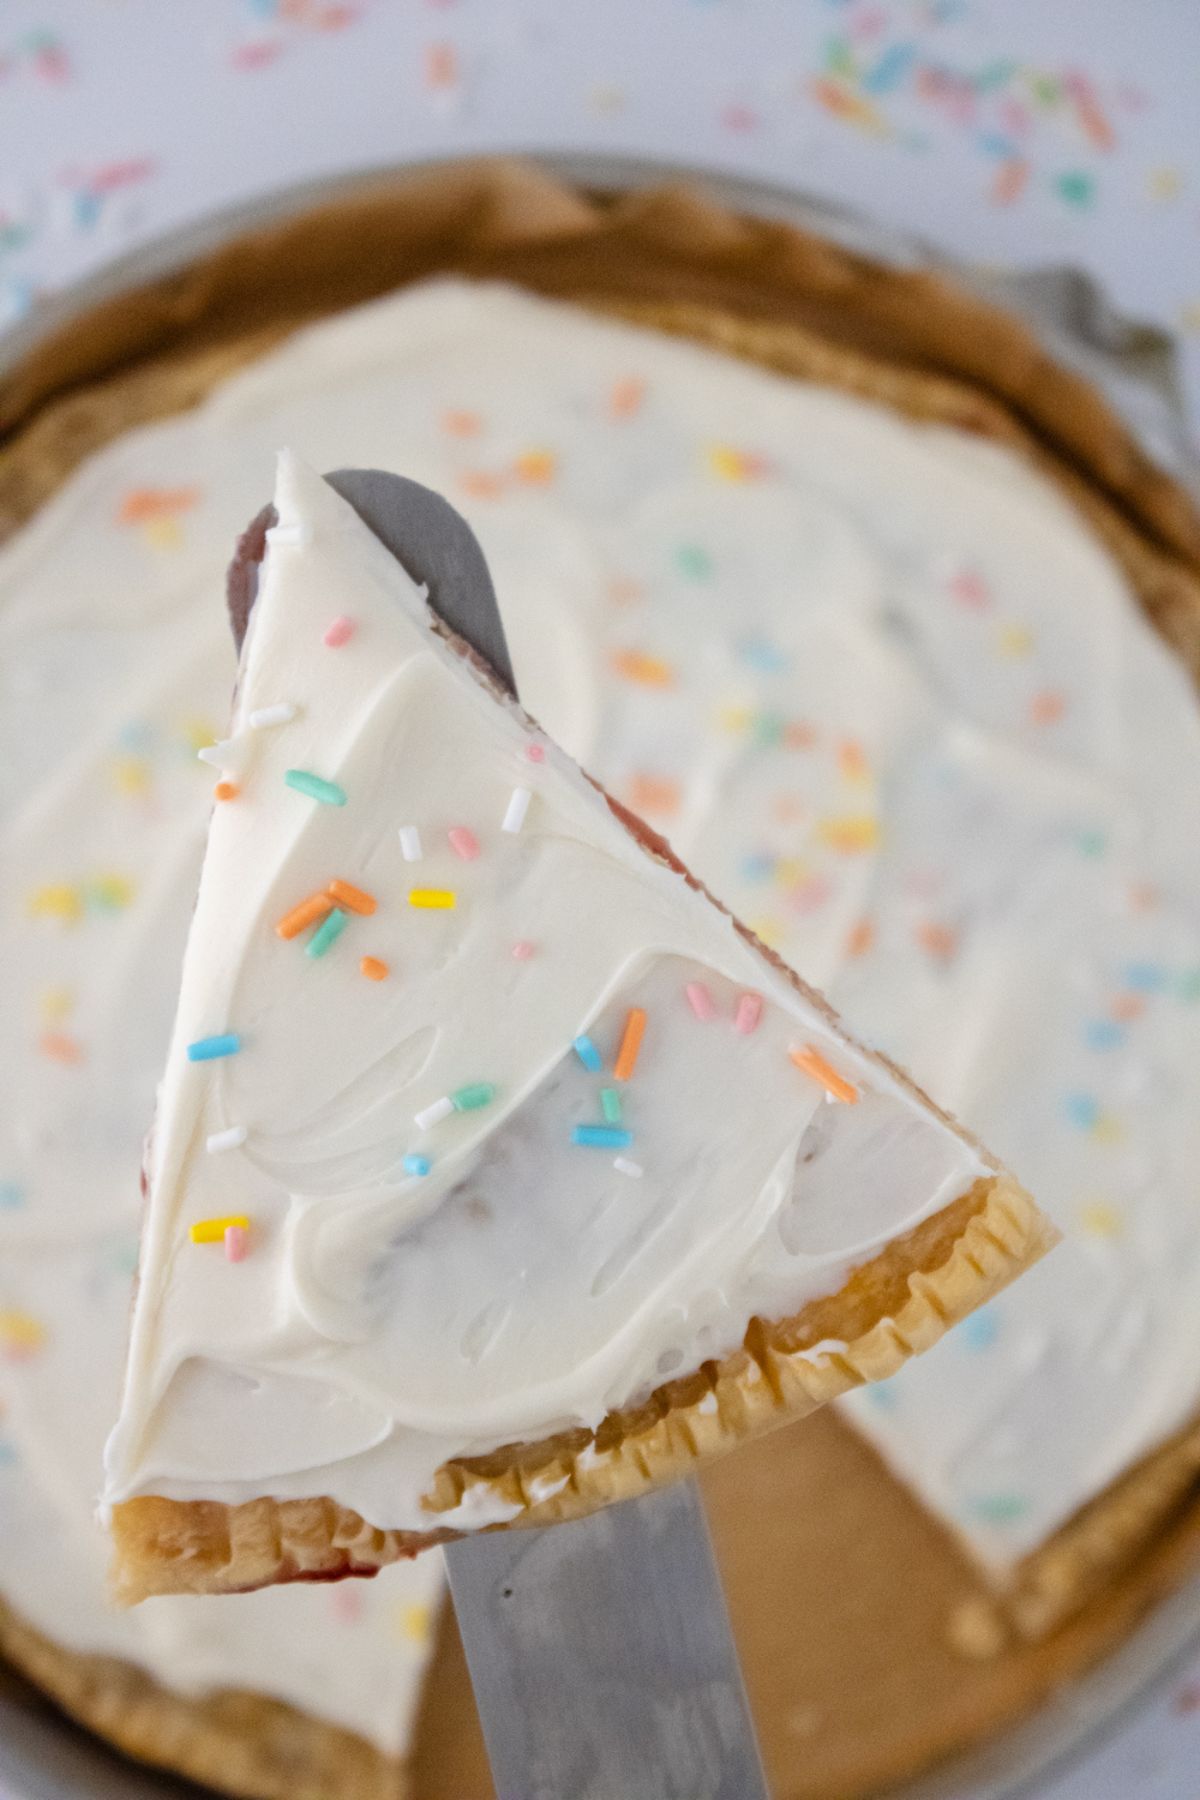 A slice of a Giant Pop Tart being held above the rest of the pie.